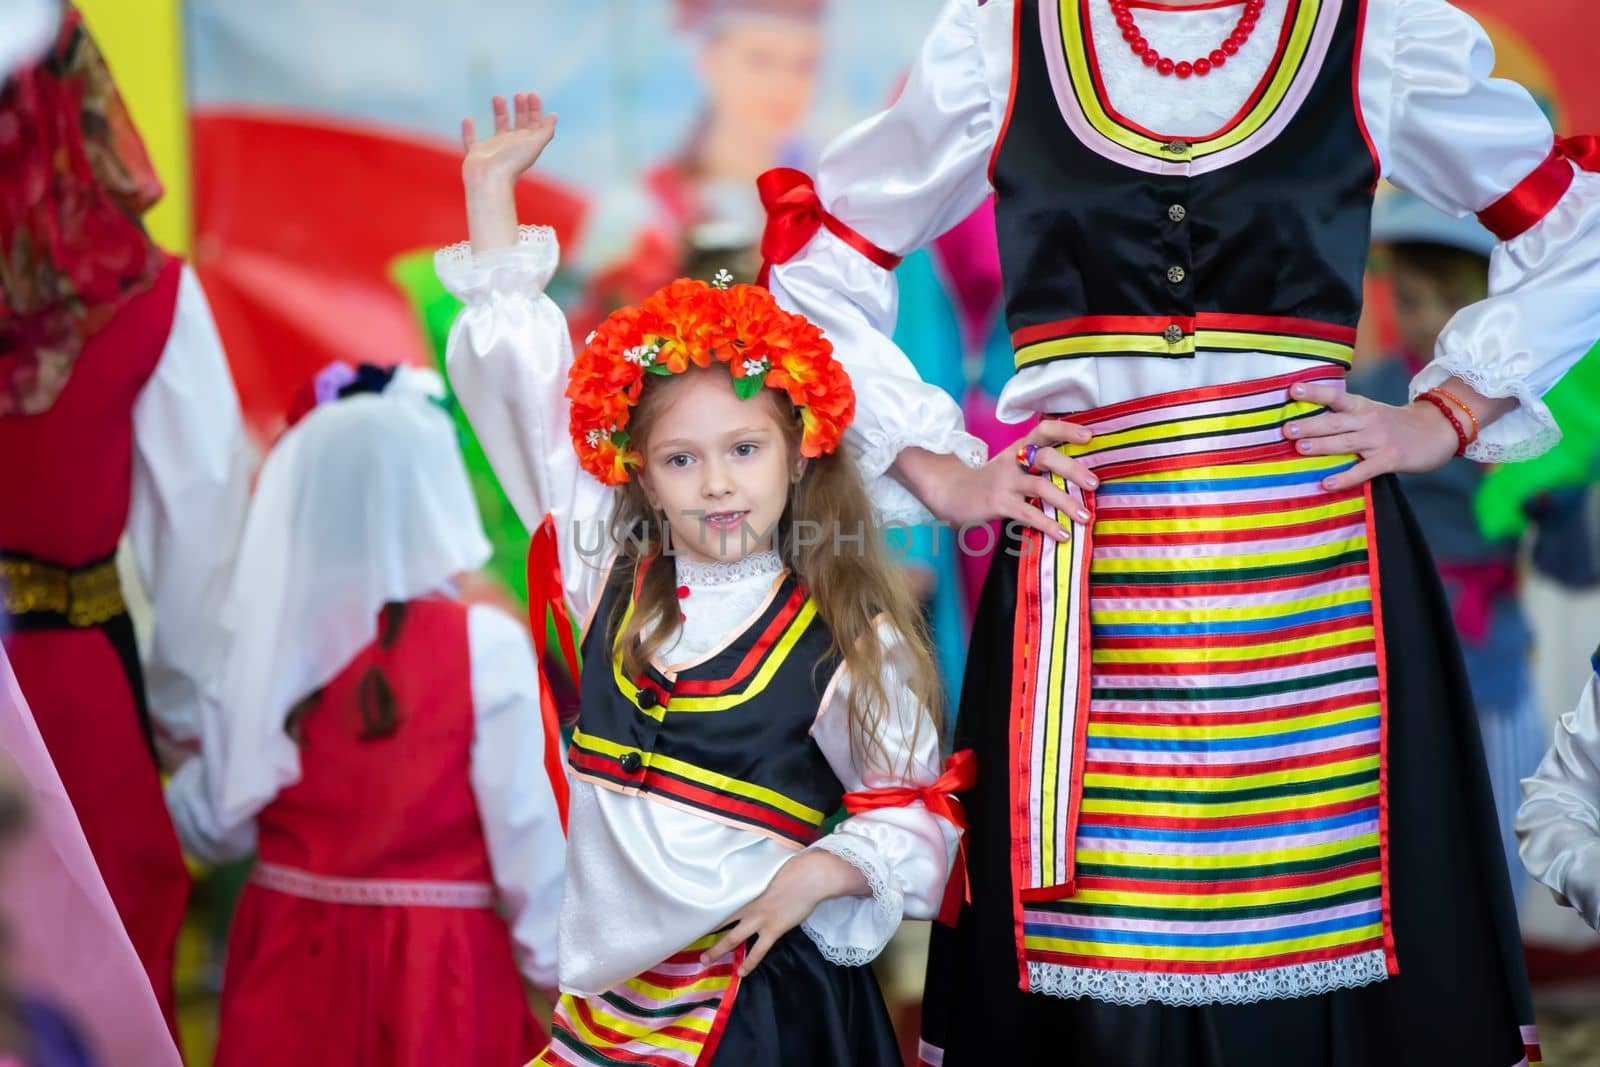 Belarus, city of Gomel, May 21, 2021 Children's holiday in the city. A little girl in a Ukrainian costume is dancing. by Sviatlana